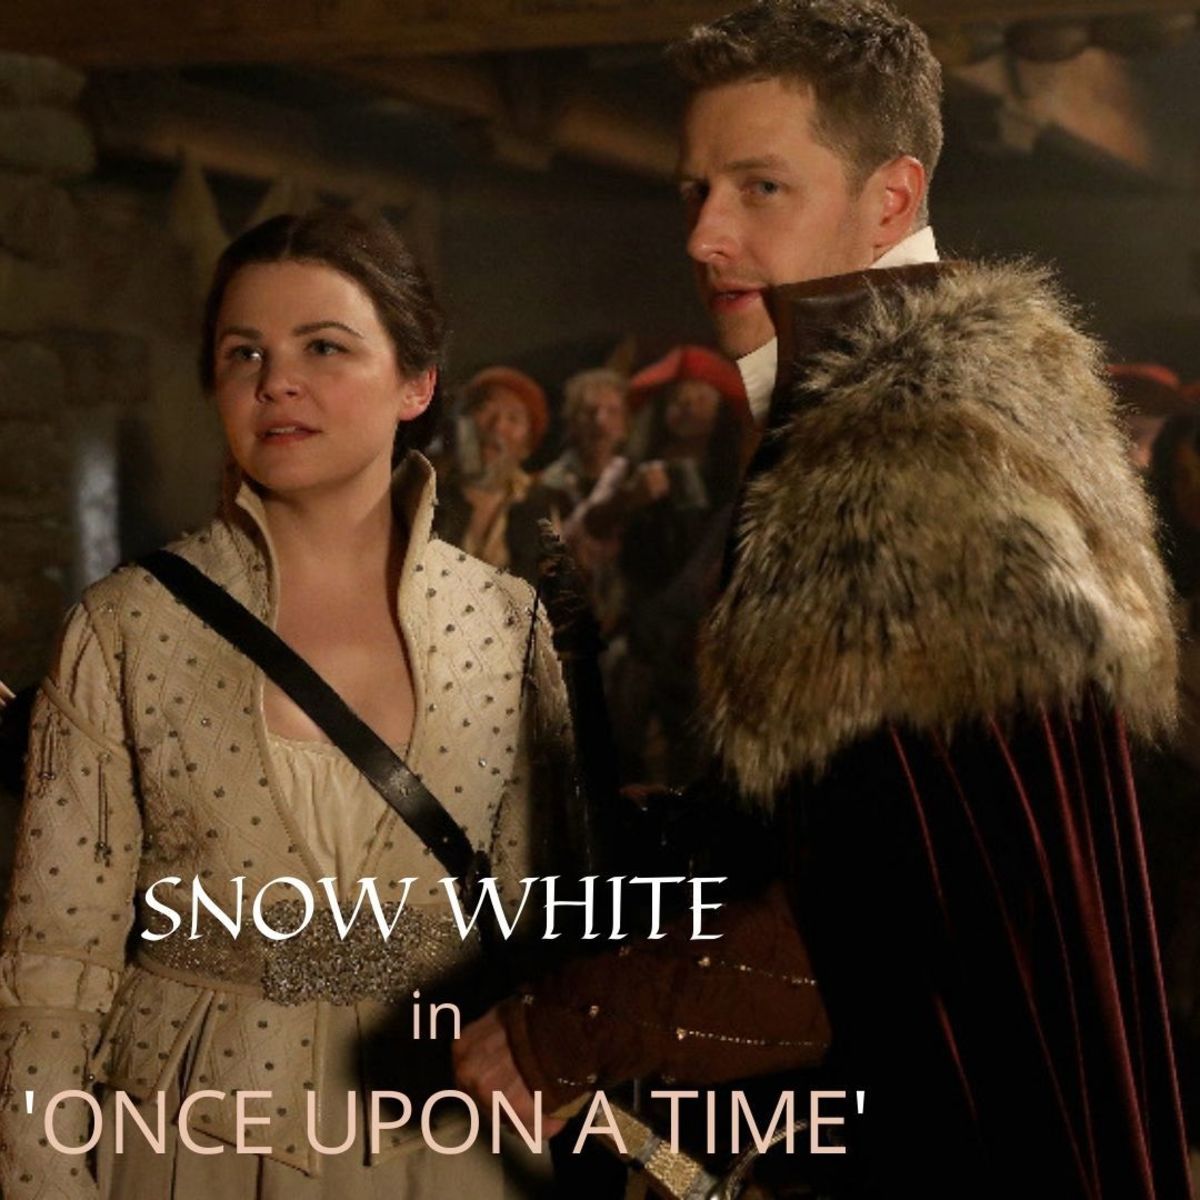 Ginnifer Goodwin as Snow White in Once Upon a Time. A bit too old for Snow White?